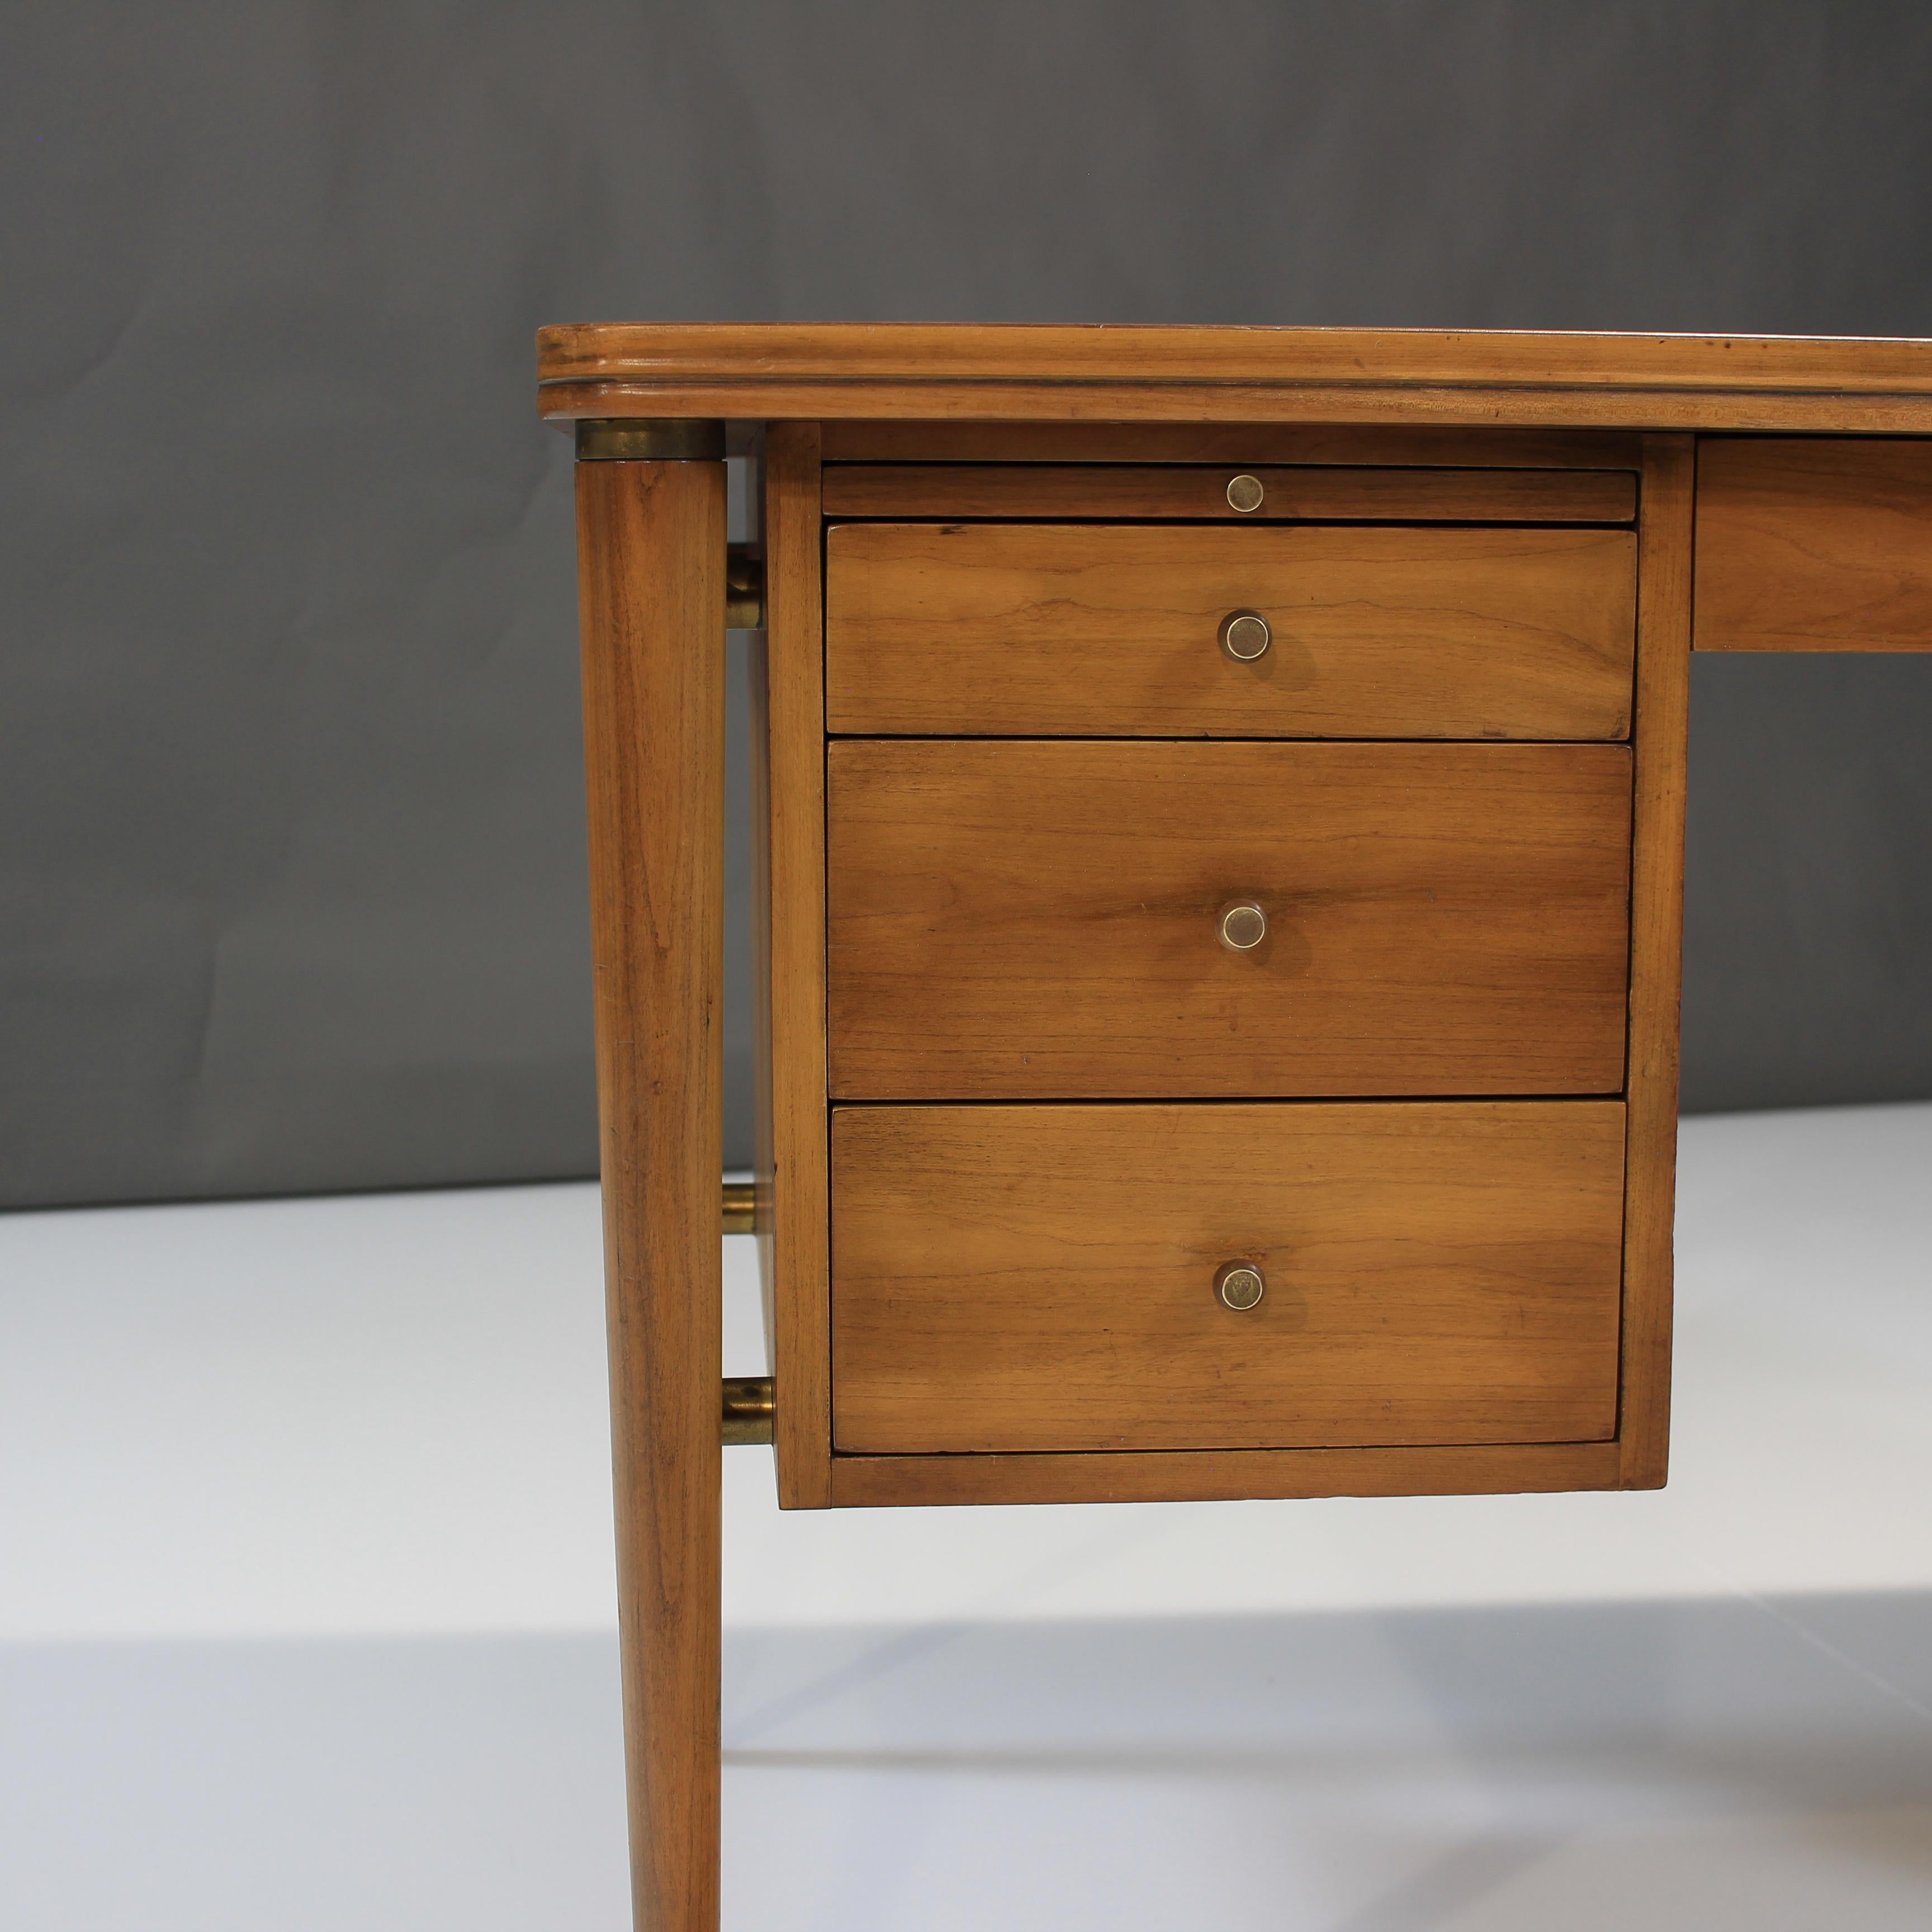 Lacquered Mid-20th Century Walnut Executive Desk by John Widdicomb For Sale